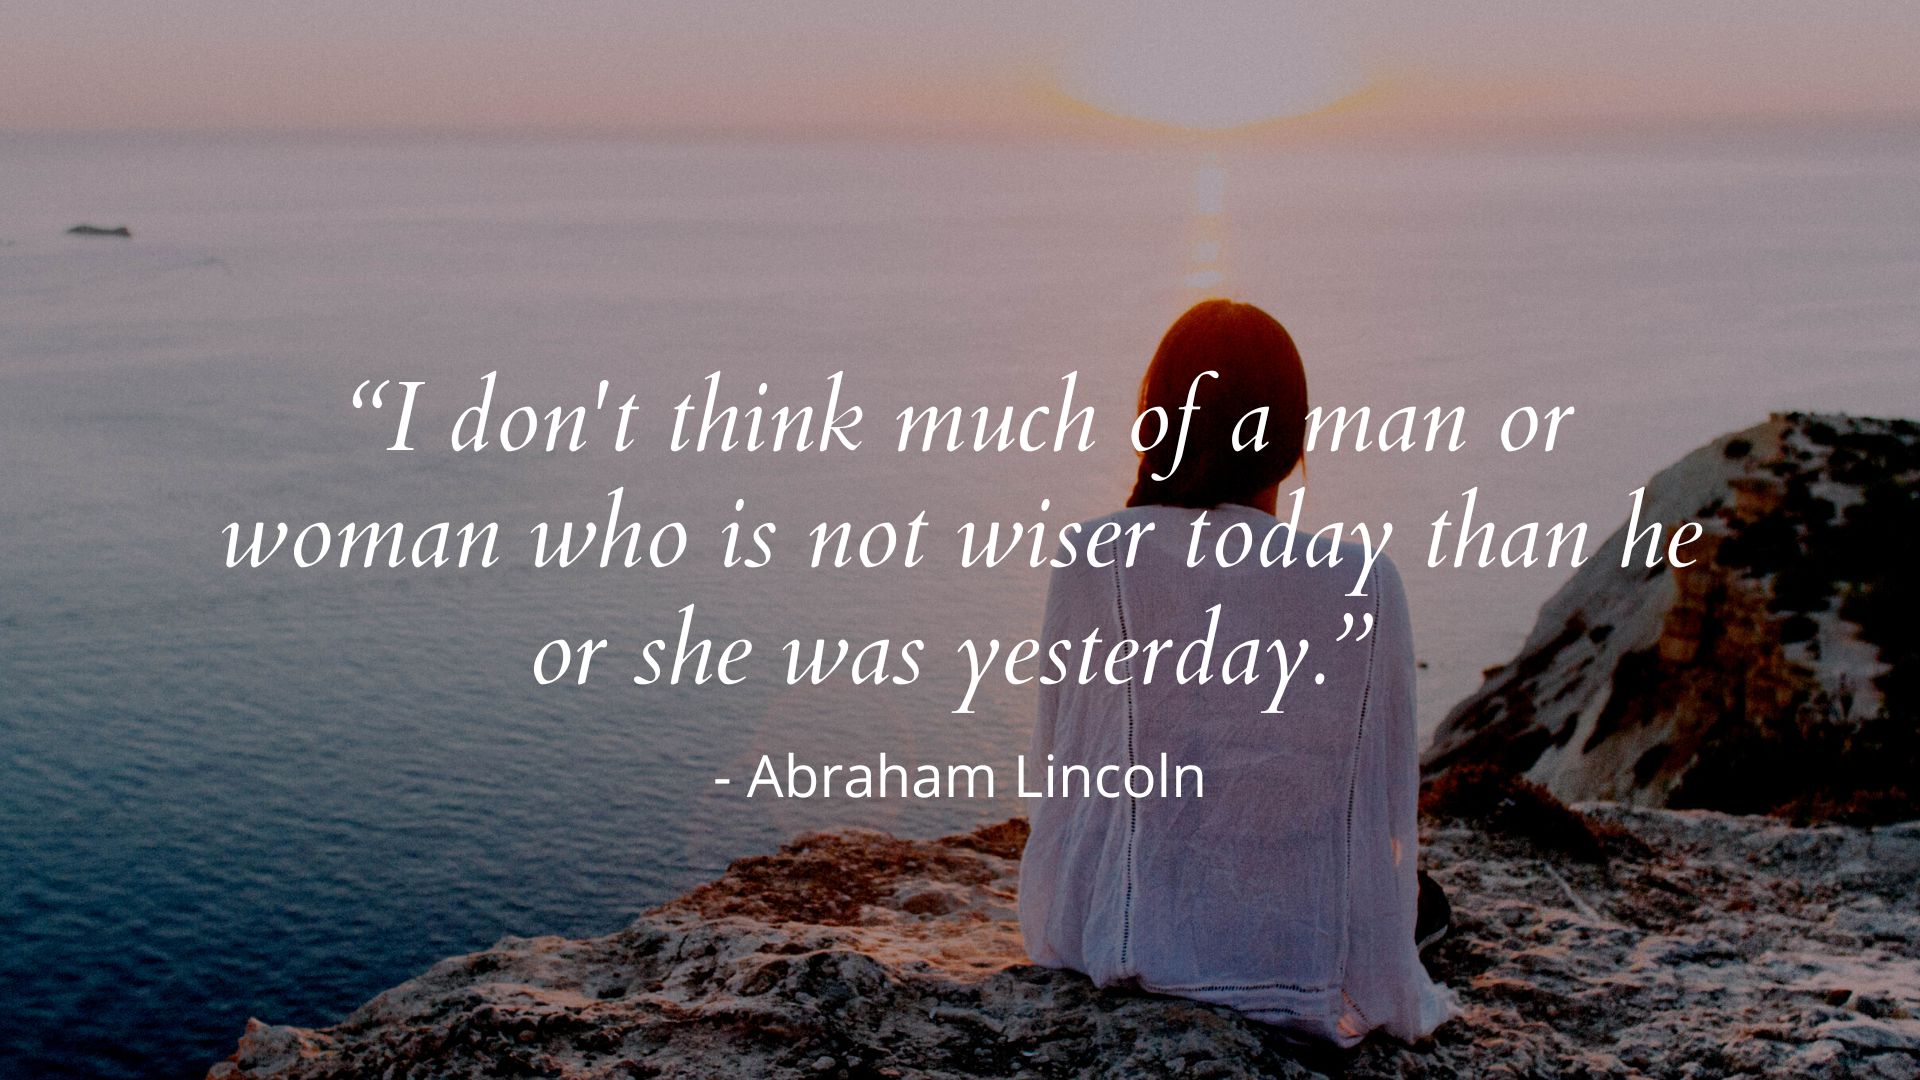 I don't think much of a man or woman who is not wiser today than he or she was yesterday. - Abraham Lincoln